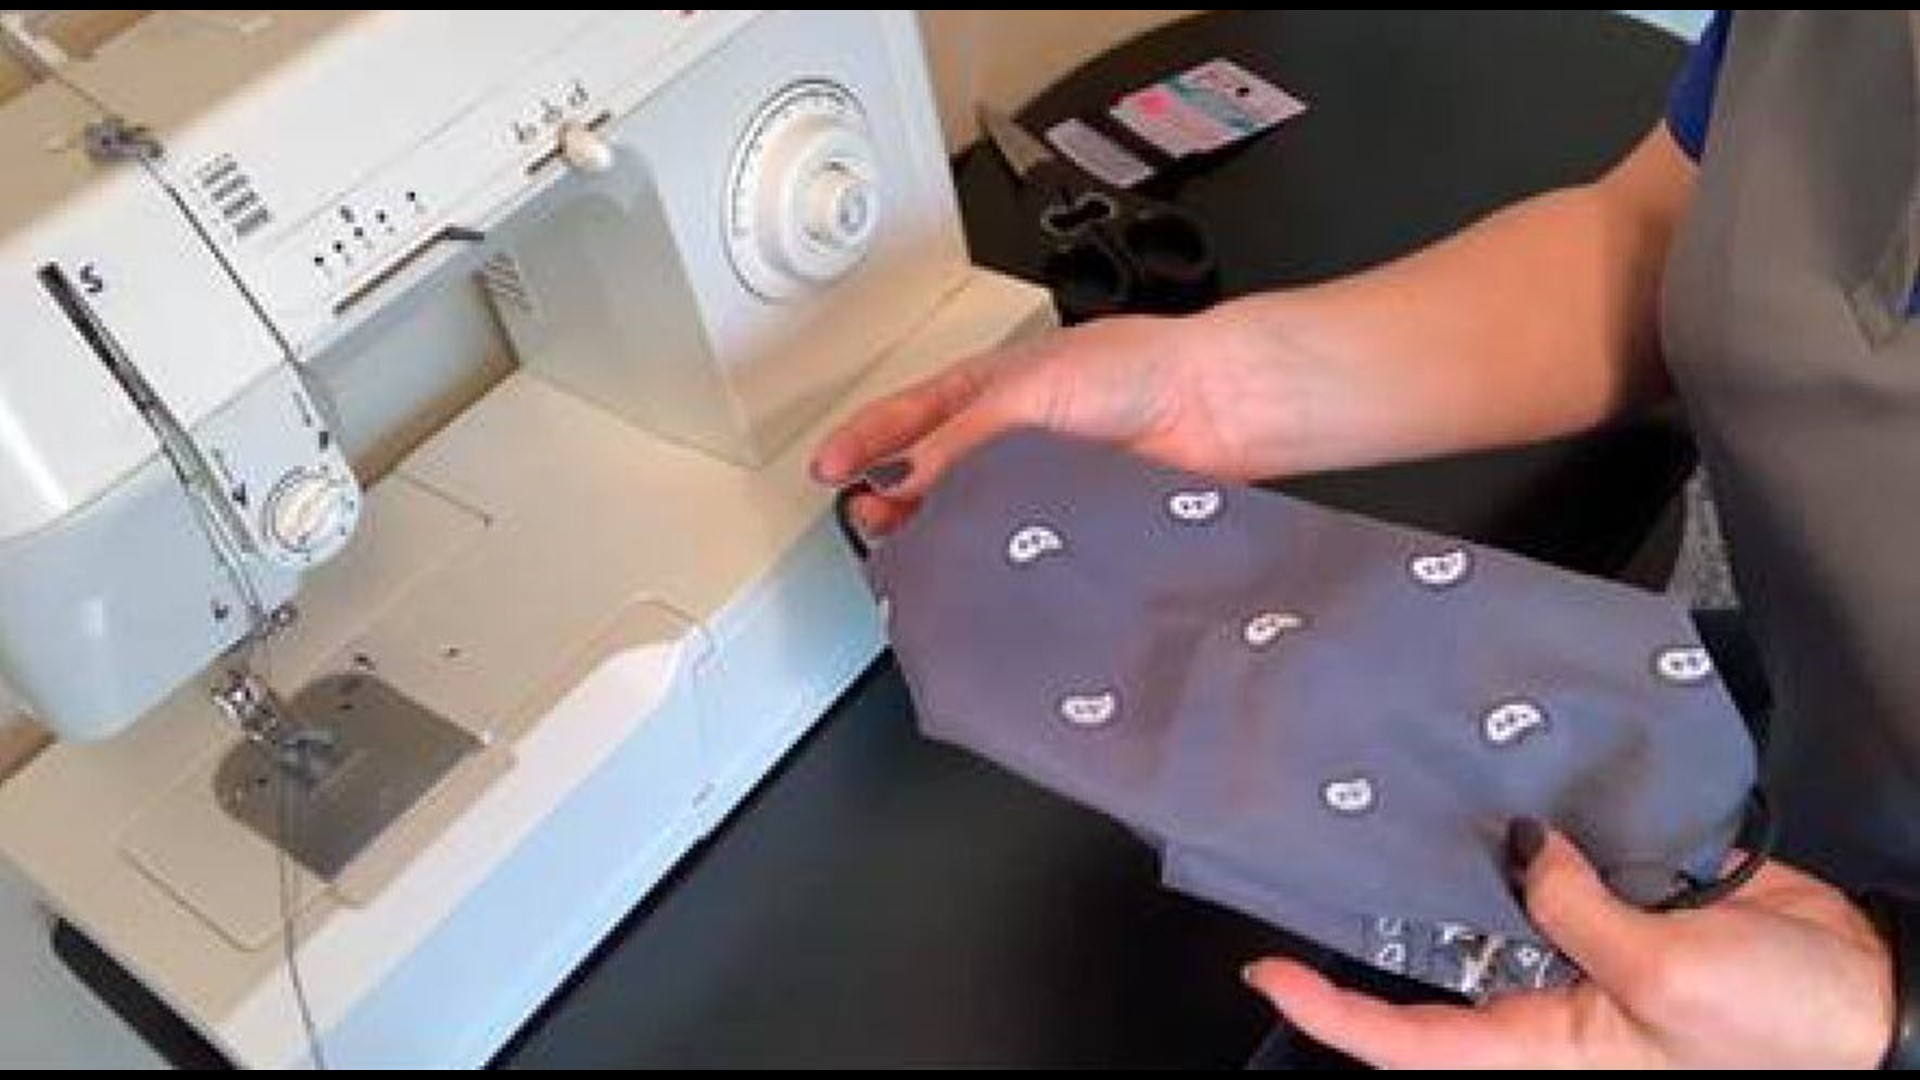 Amid the coronavirus pandemic, the CDC recommends wearing a face covering when out in public. Digital Journalist Megan Ball shares how to make a no-sew mask.